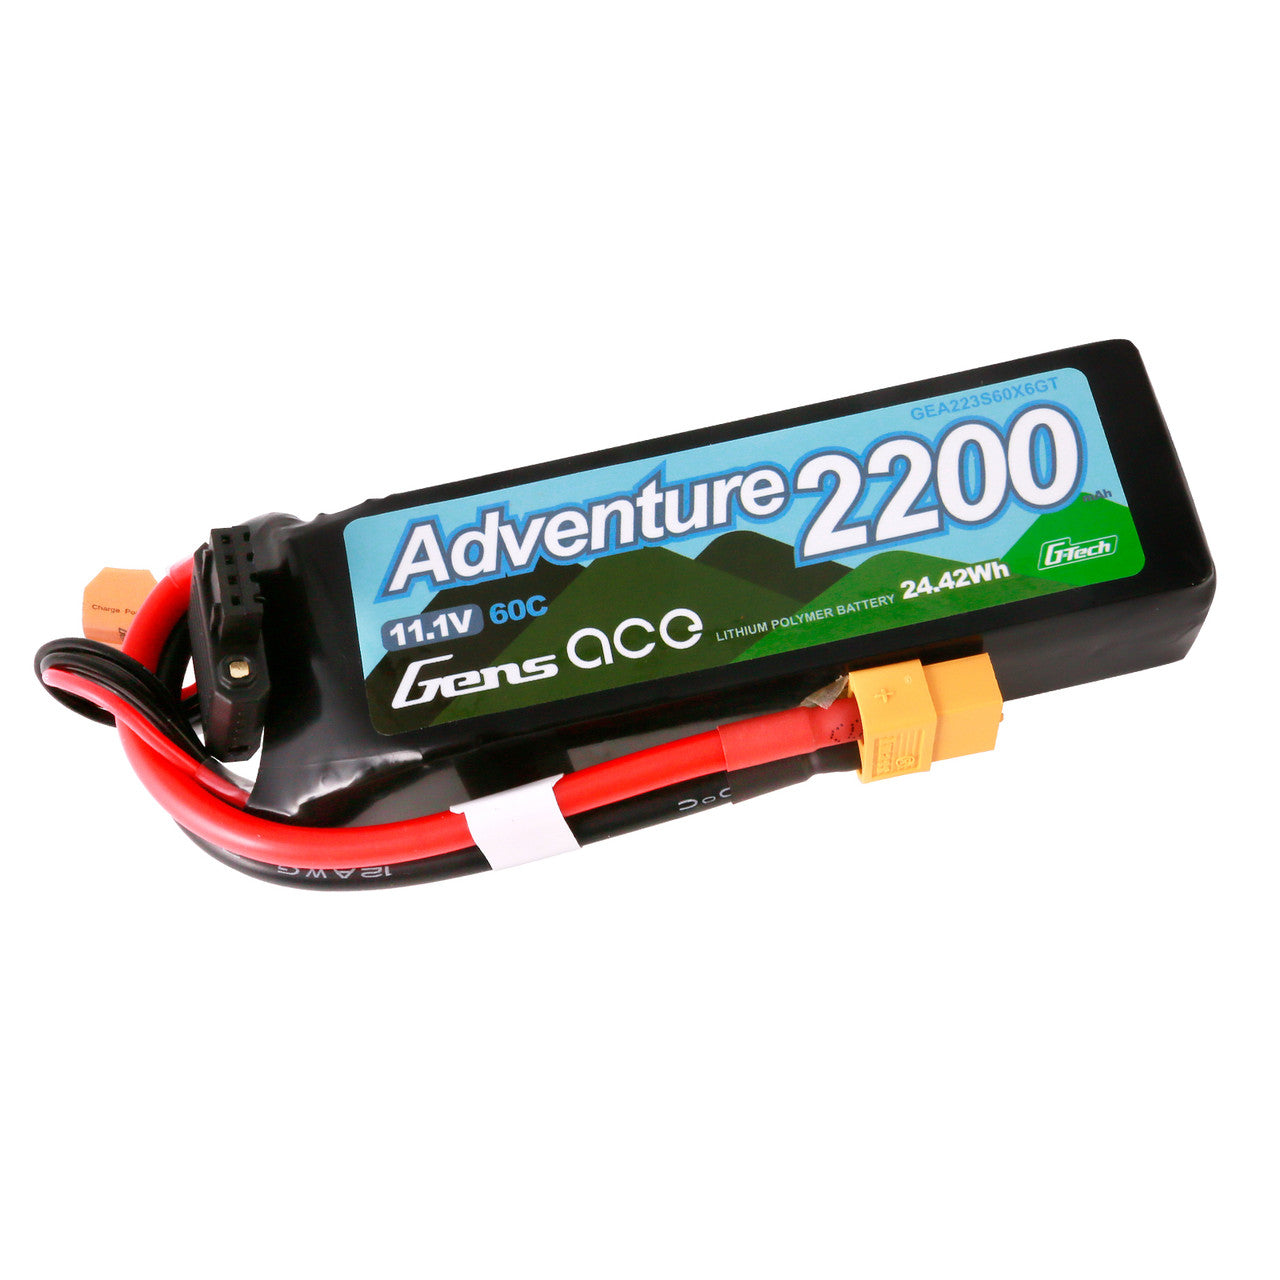 Gens Ace G-Tech Adventure 2200mAh 3S1P 11.1V 60C Lipo Battery Pack With XT60 Plug For RC Crawler